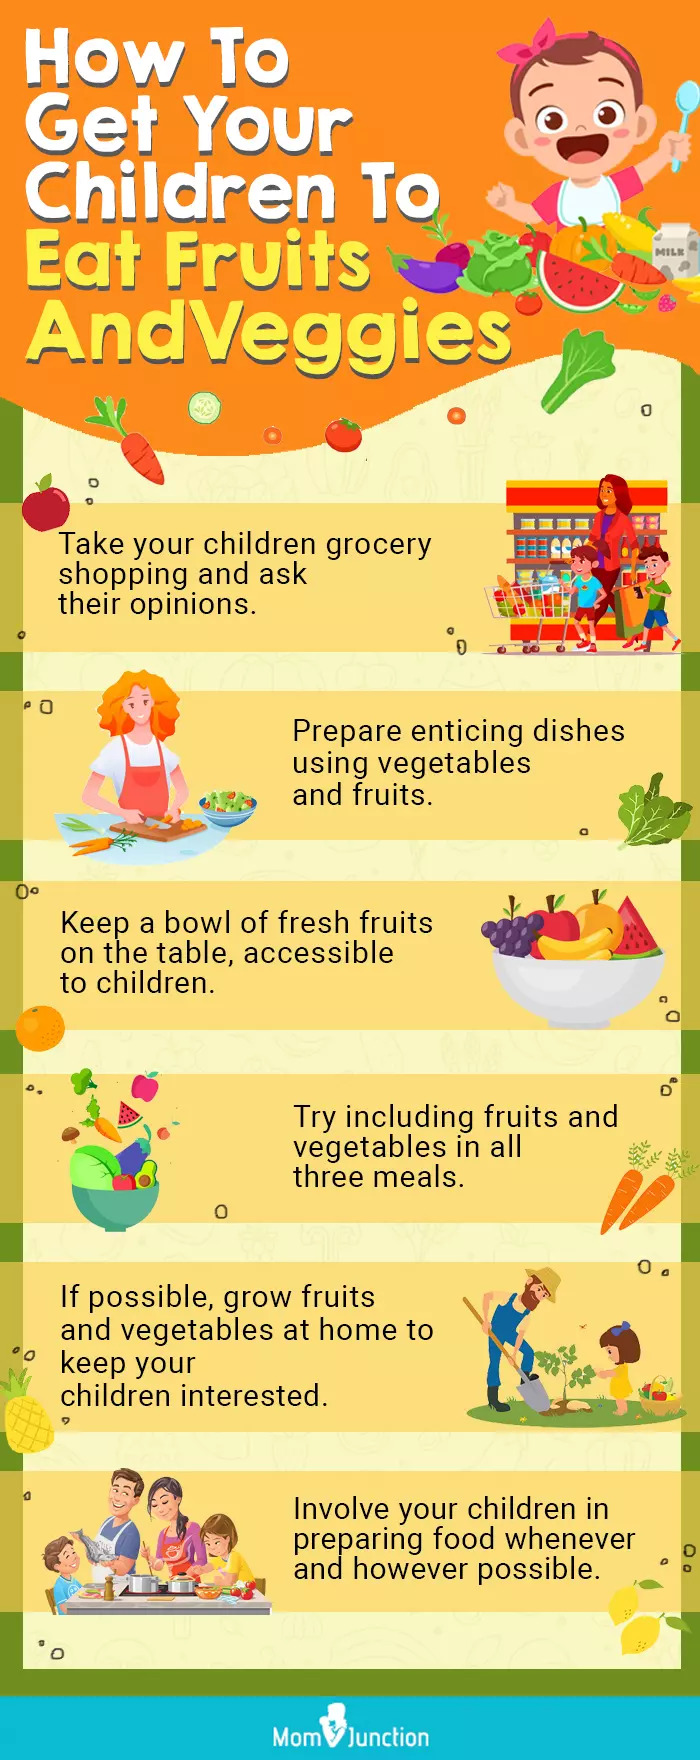 how to get your children to eat fruits and veggies (infographic)